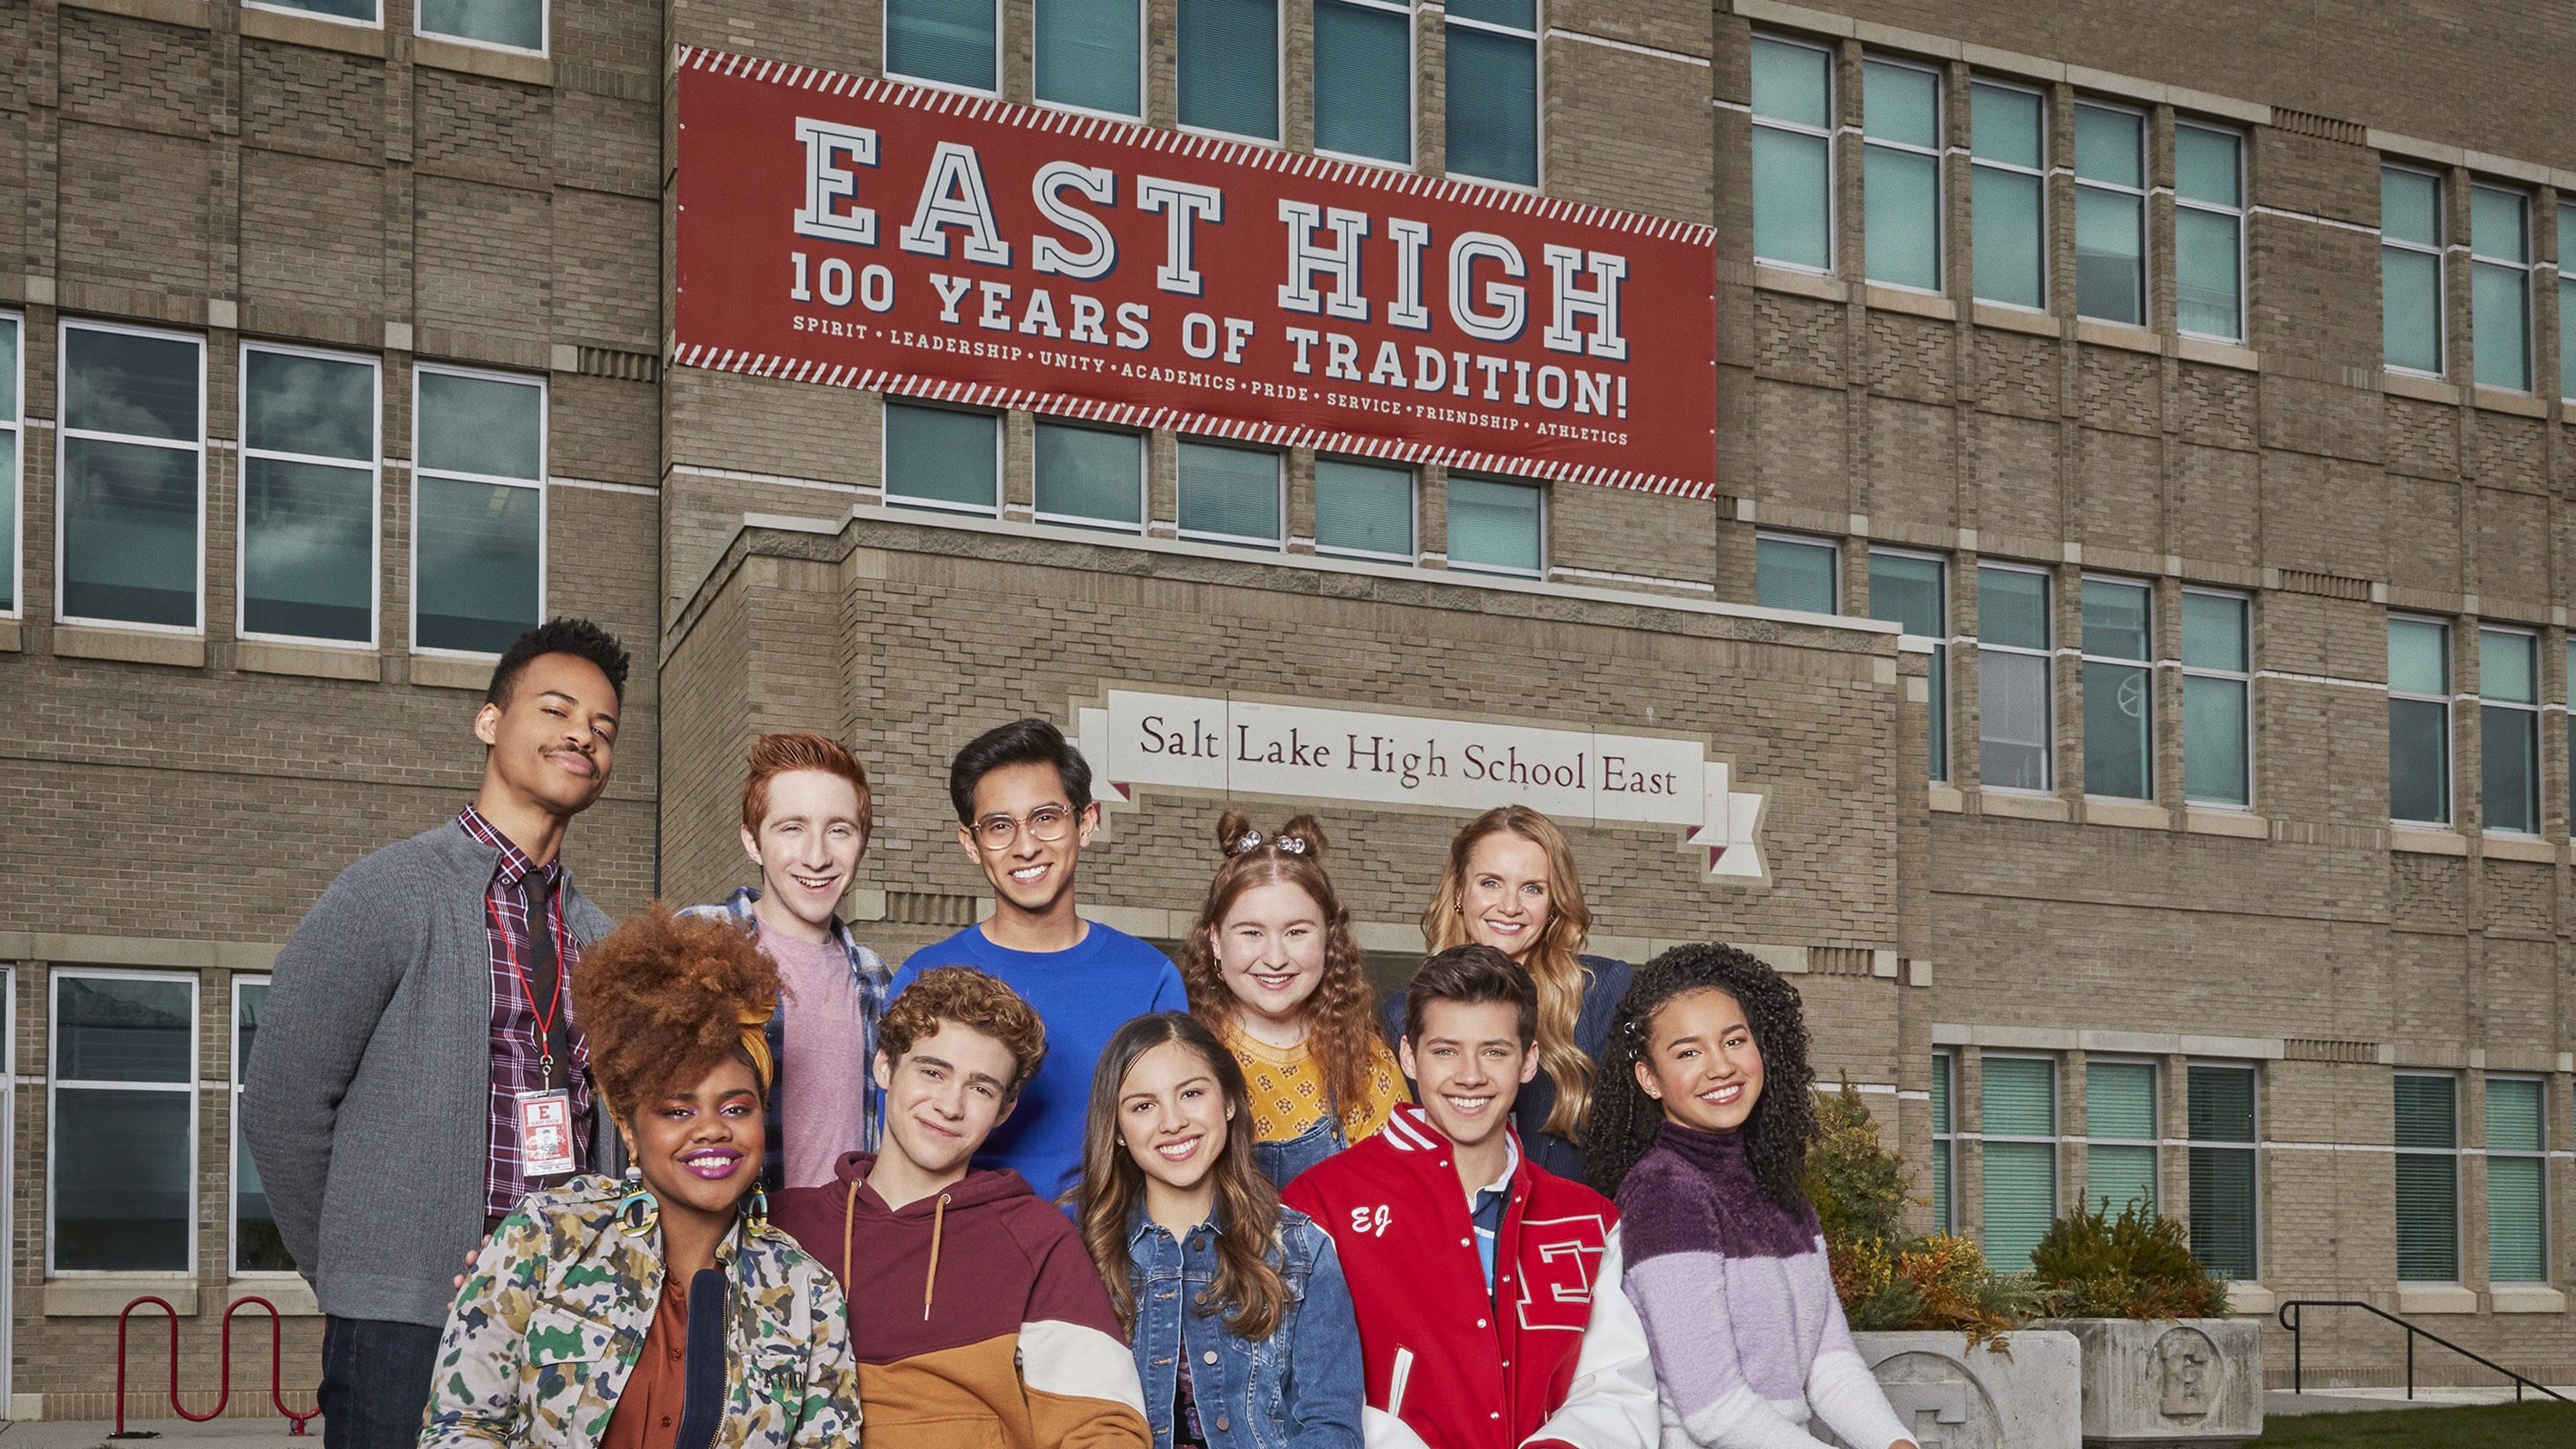 High School Musical' TV Series Reveals Title and Character Details